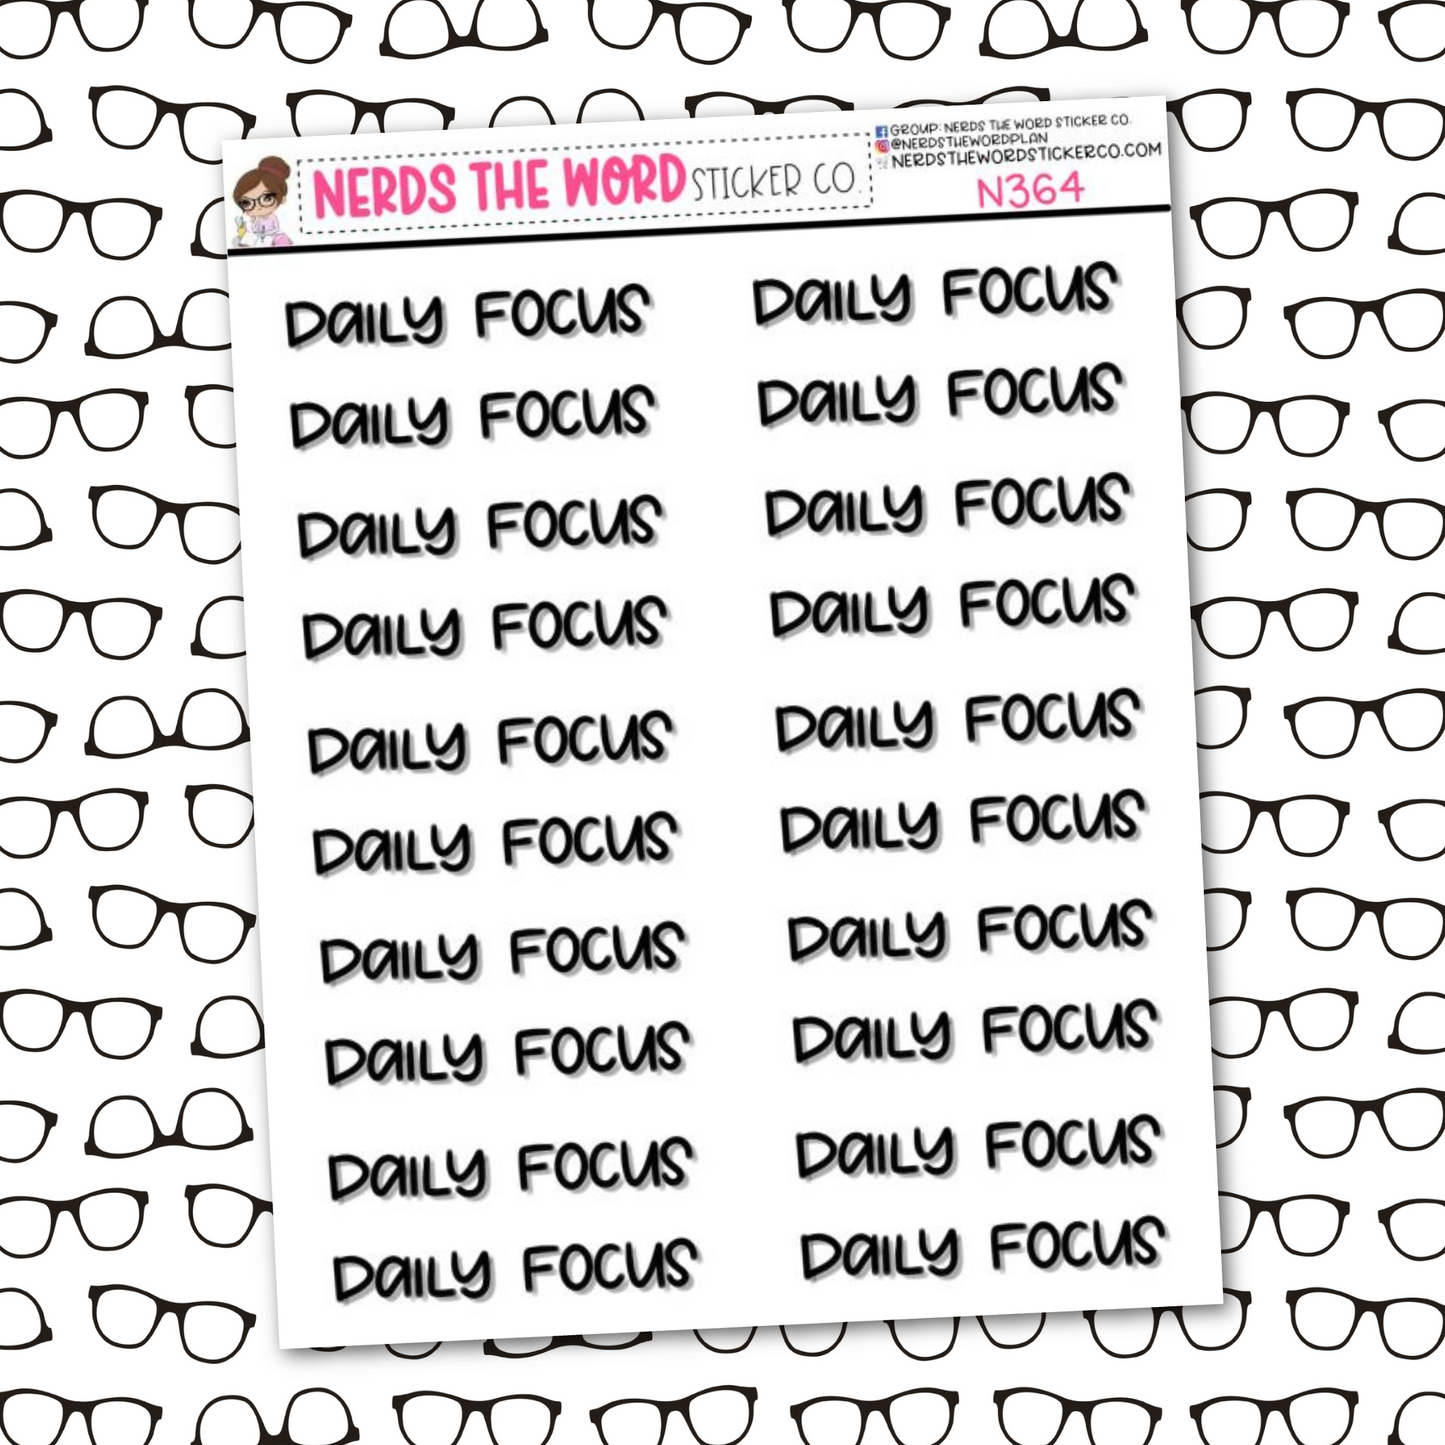 Daily Focus Typography Sticker Sheet